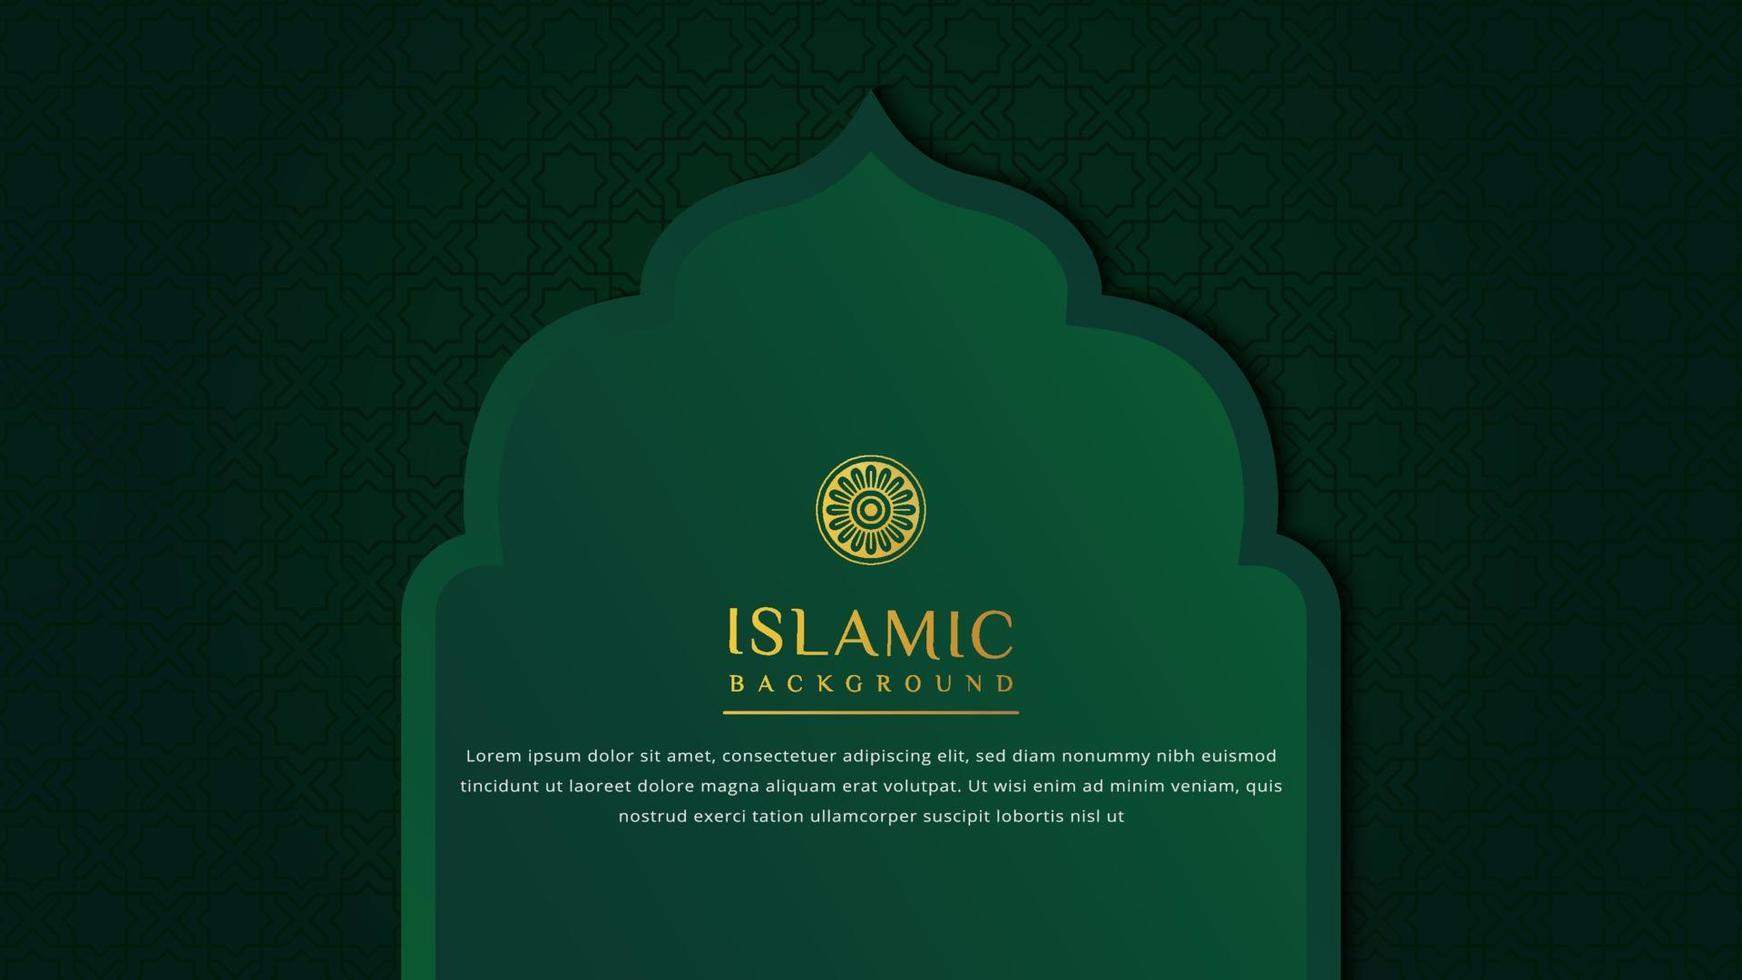 Luxury Islamic background with golden ornament border pattern and green color, ramadan background concept vector